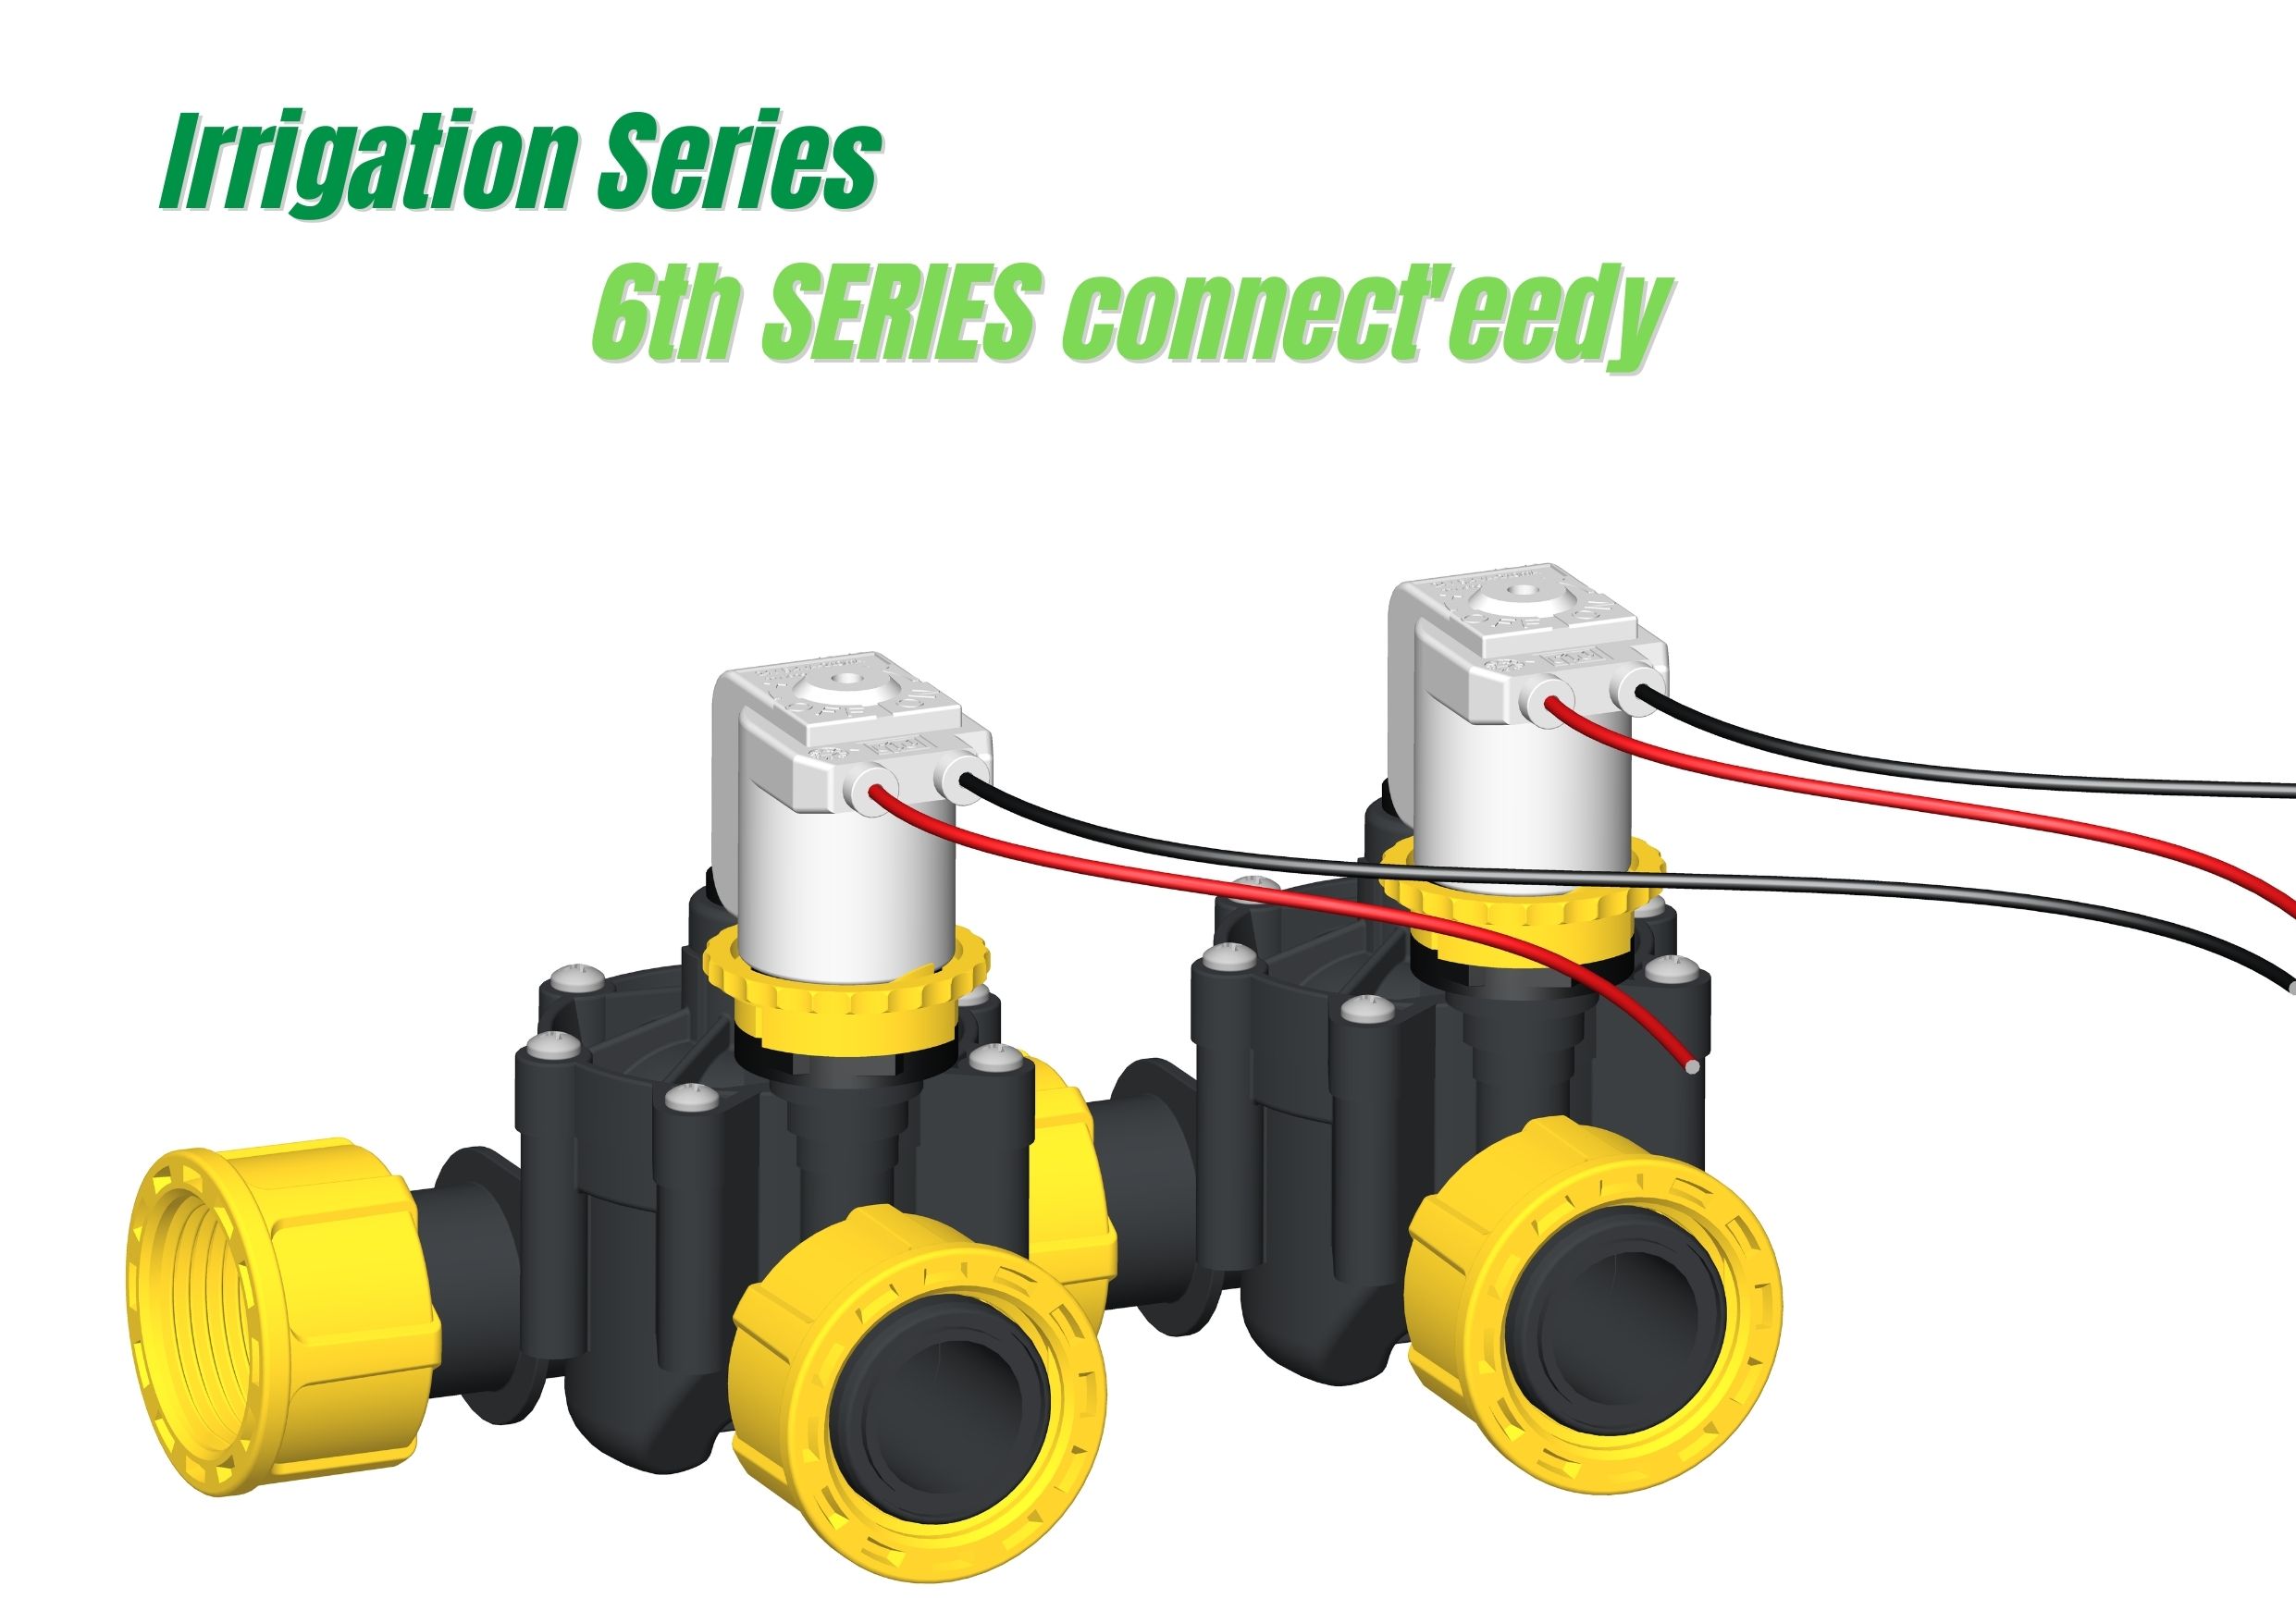 Discover the 6th Series Connect'eedy - the new modular solenoid valve for the irrigation industry 